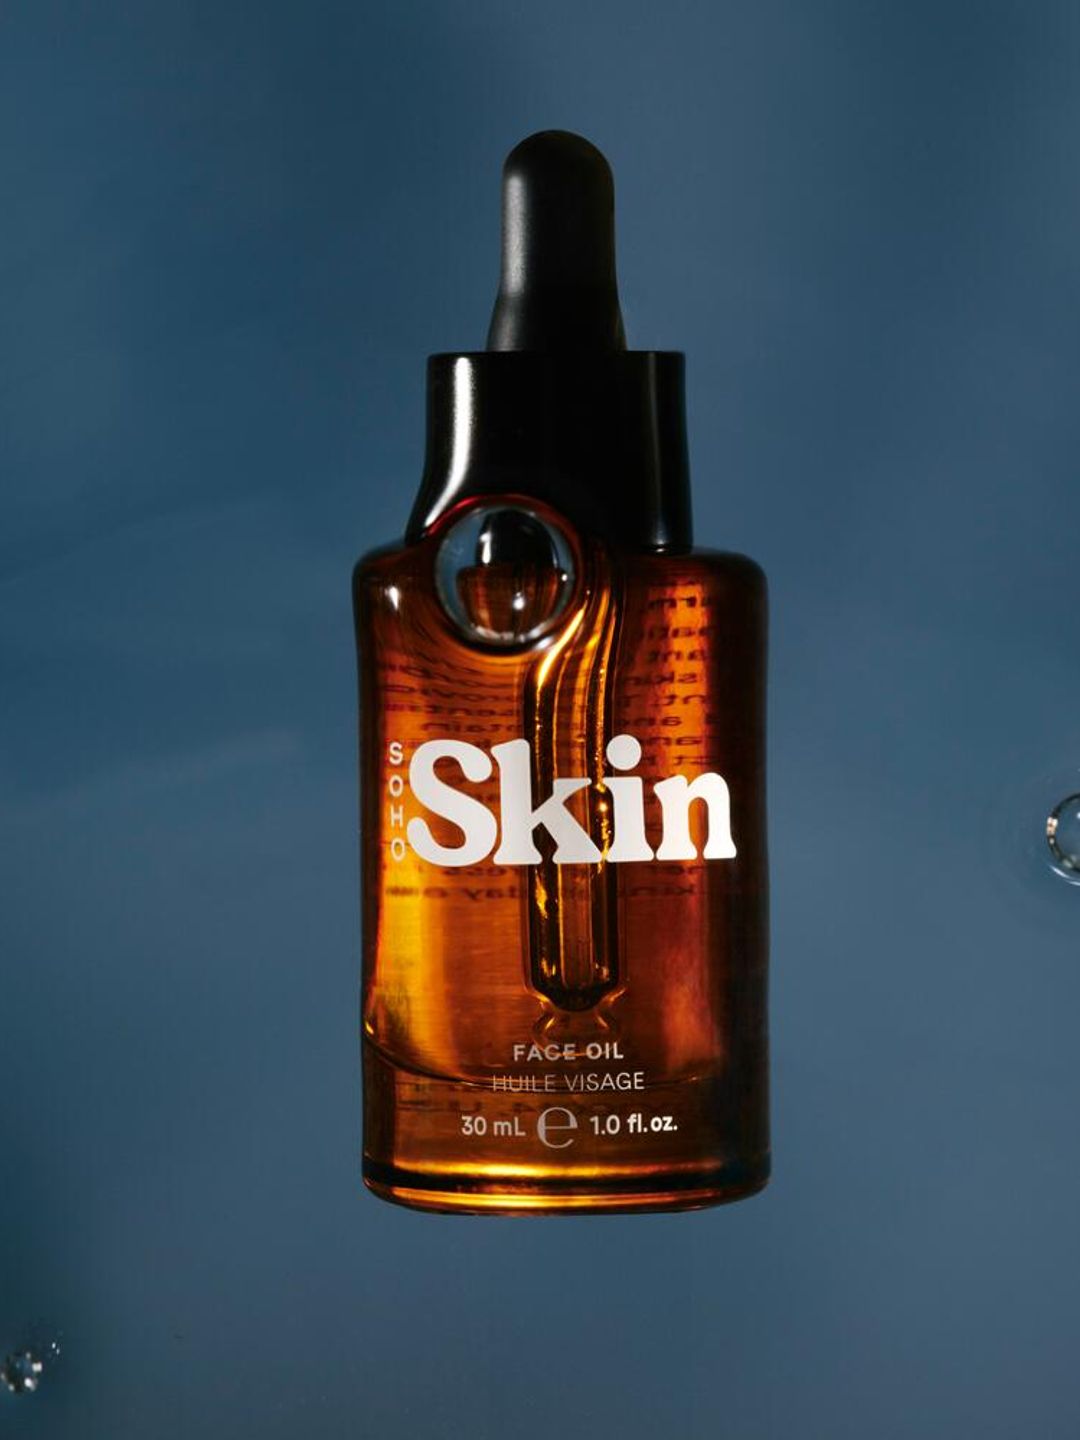 Soho Skin's new oil is a must-have